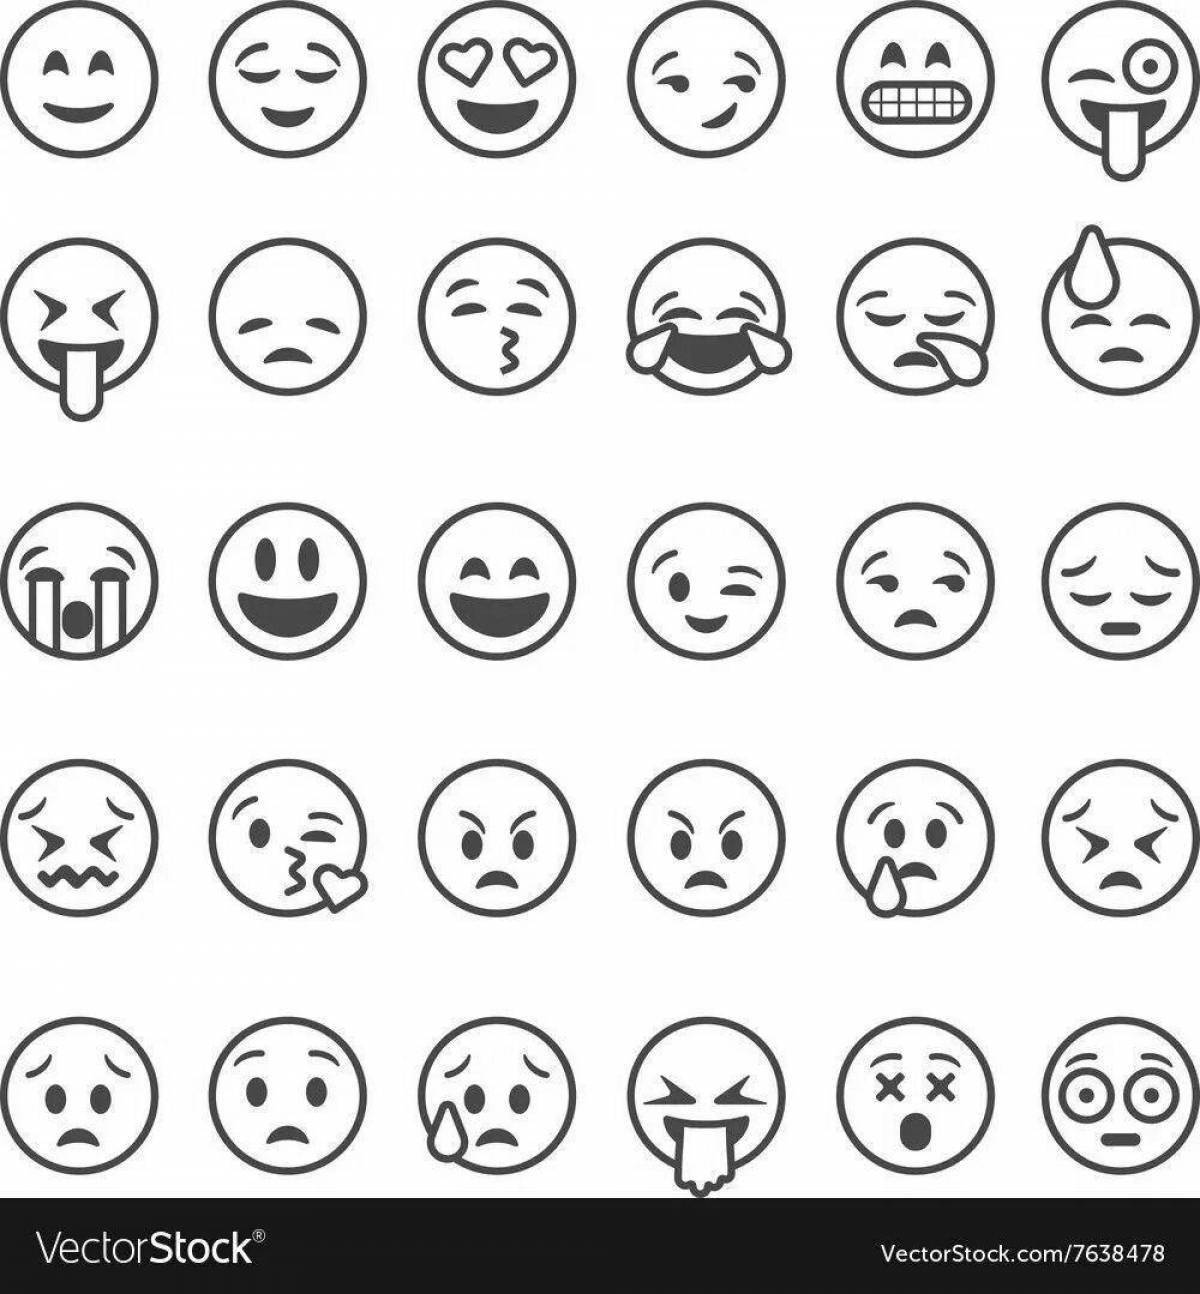 Coloring page of happy smiley